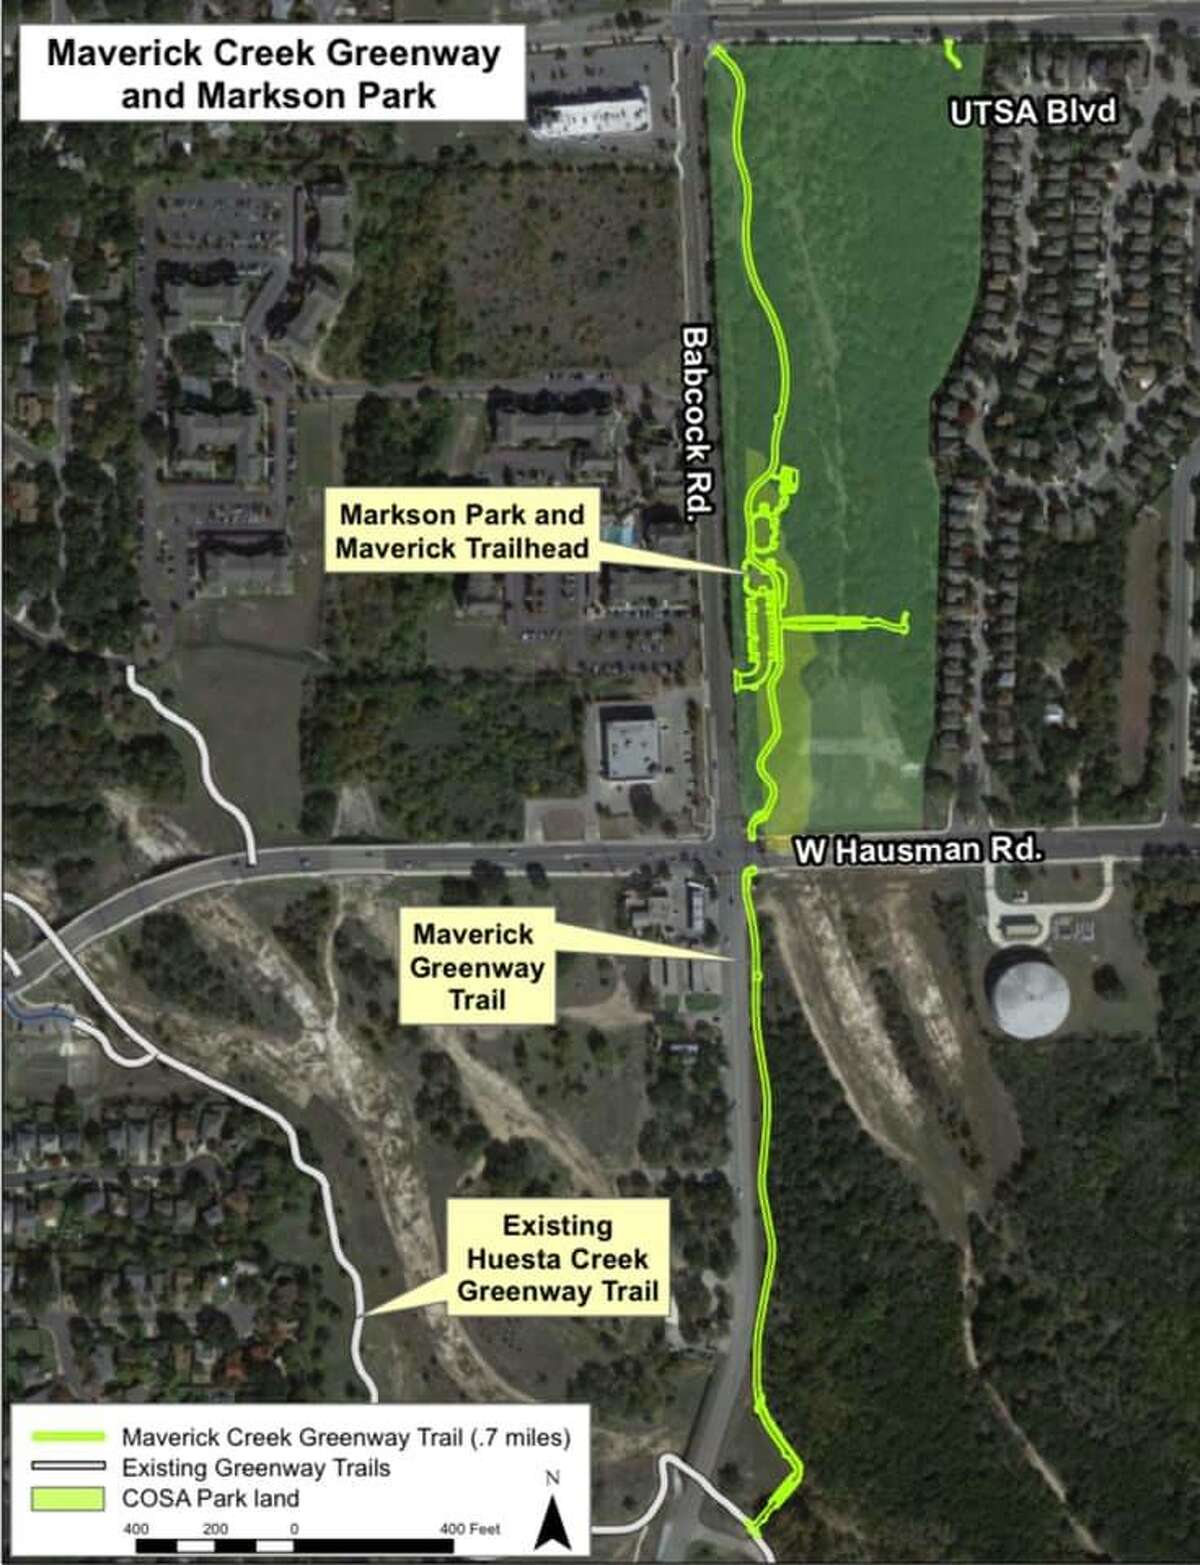 The new trail connects to the Leon Creek Greenway.